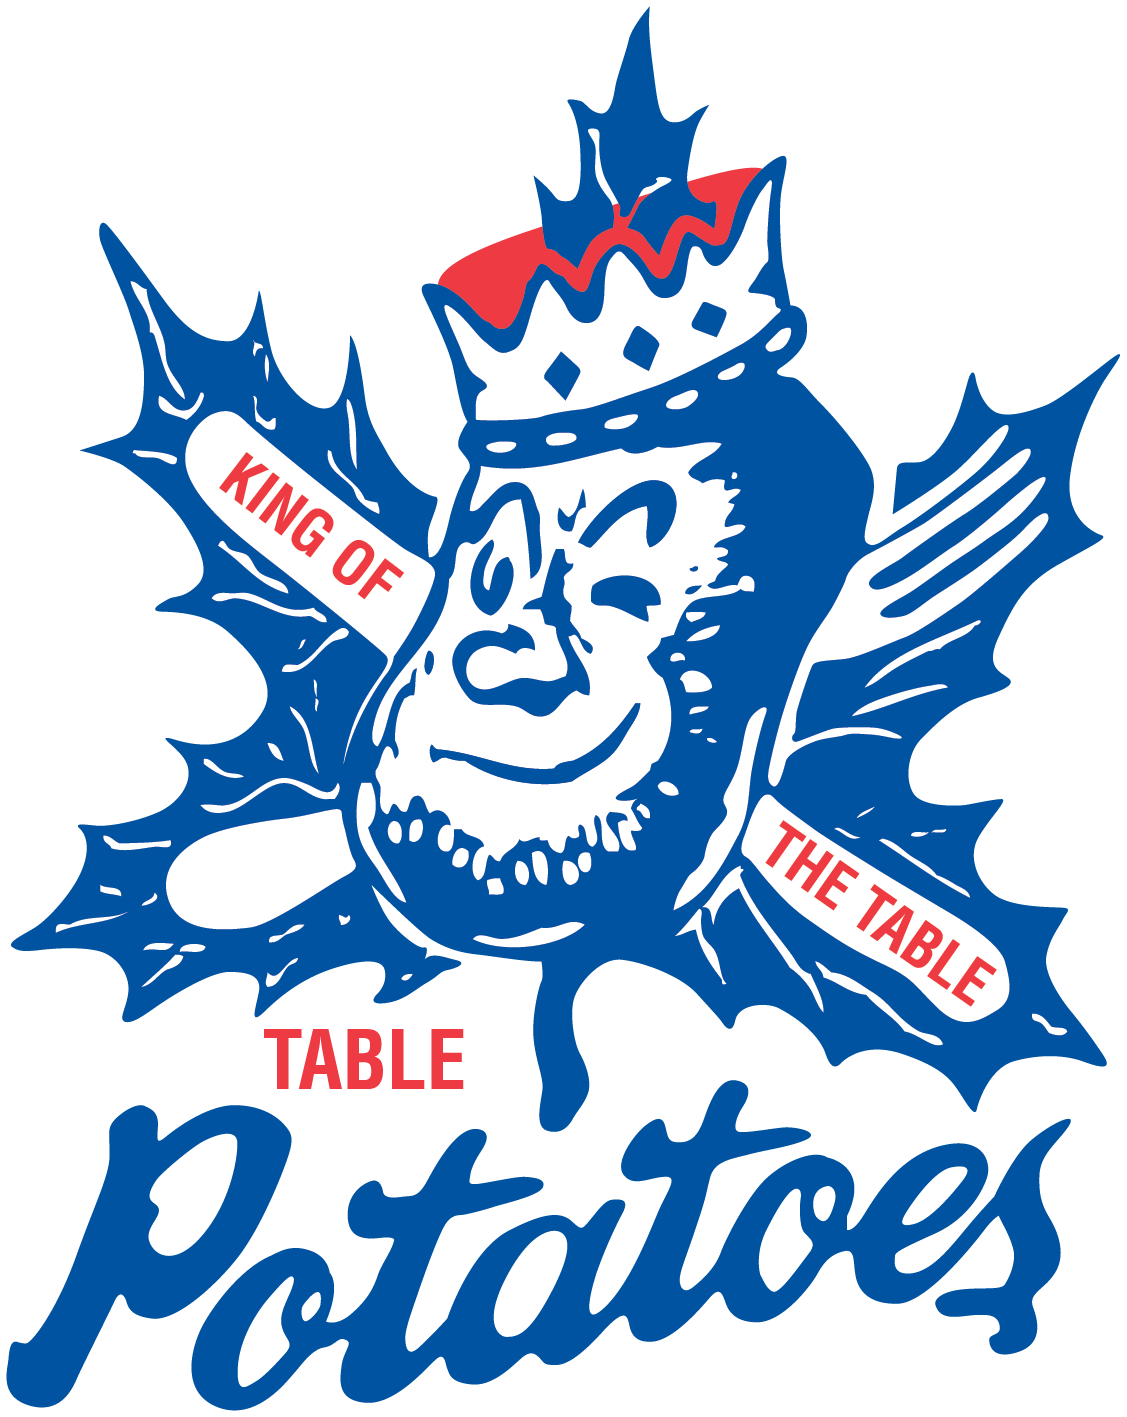 Streef King of the Table Potatoes logo